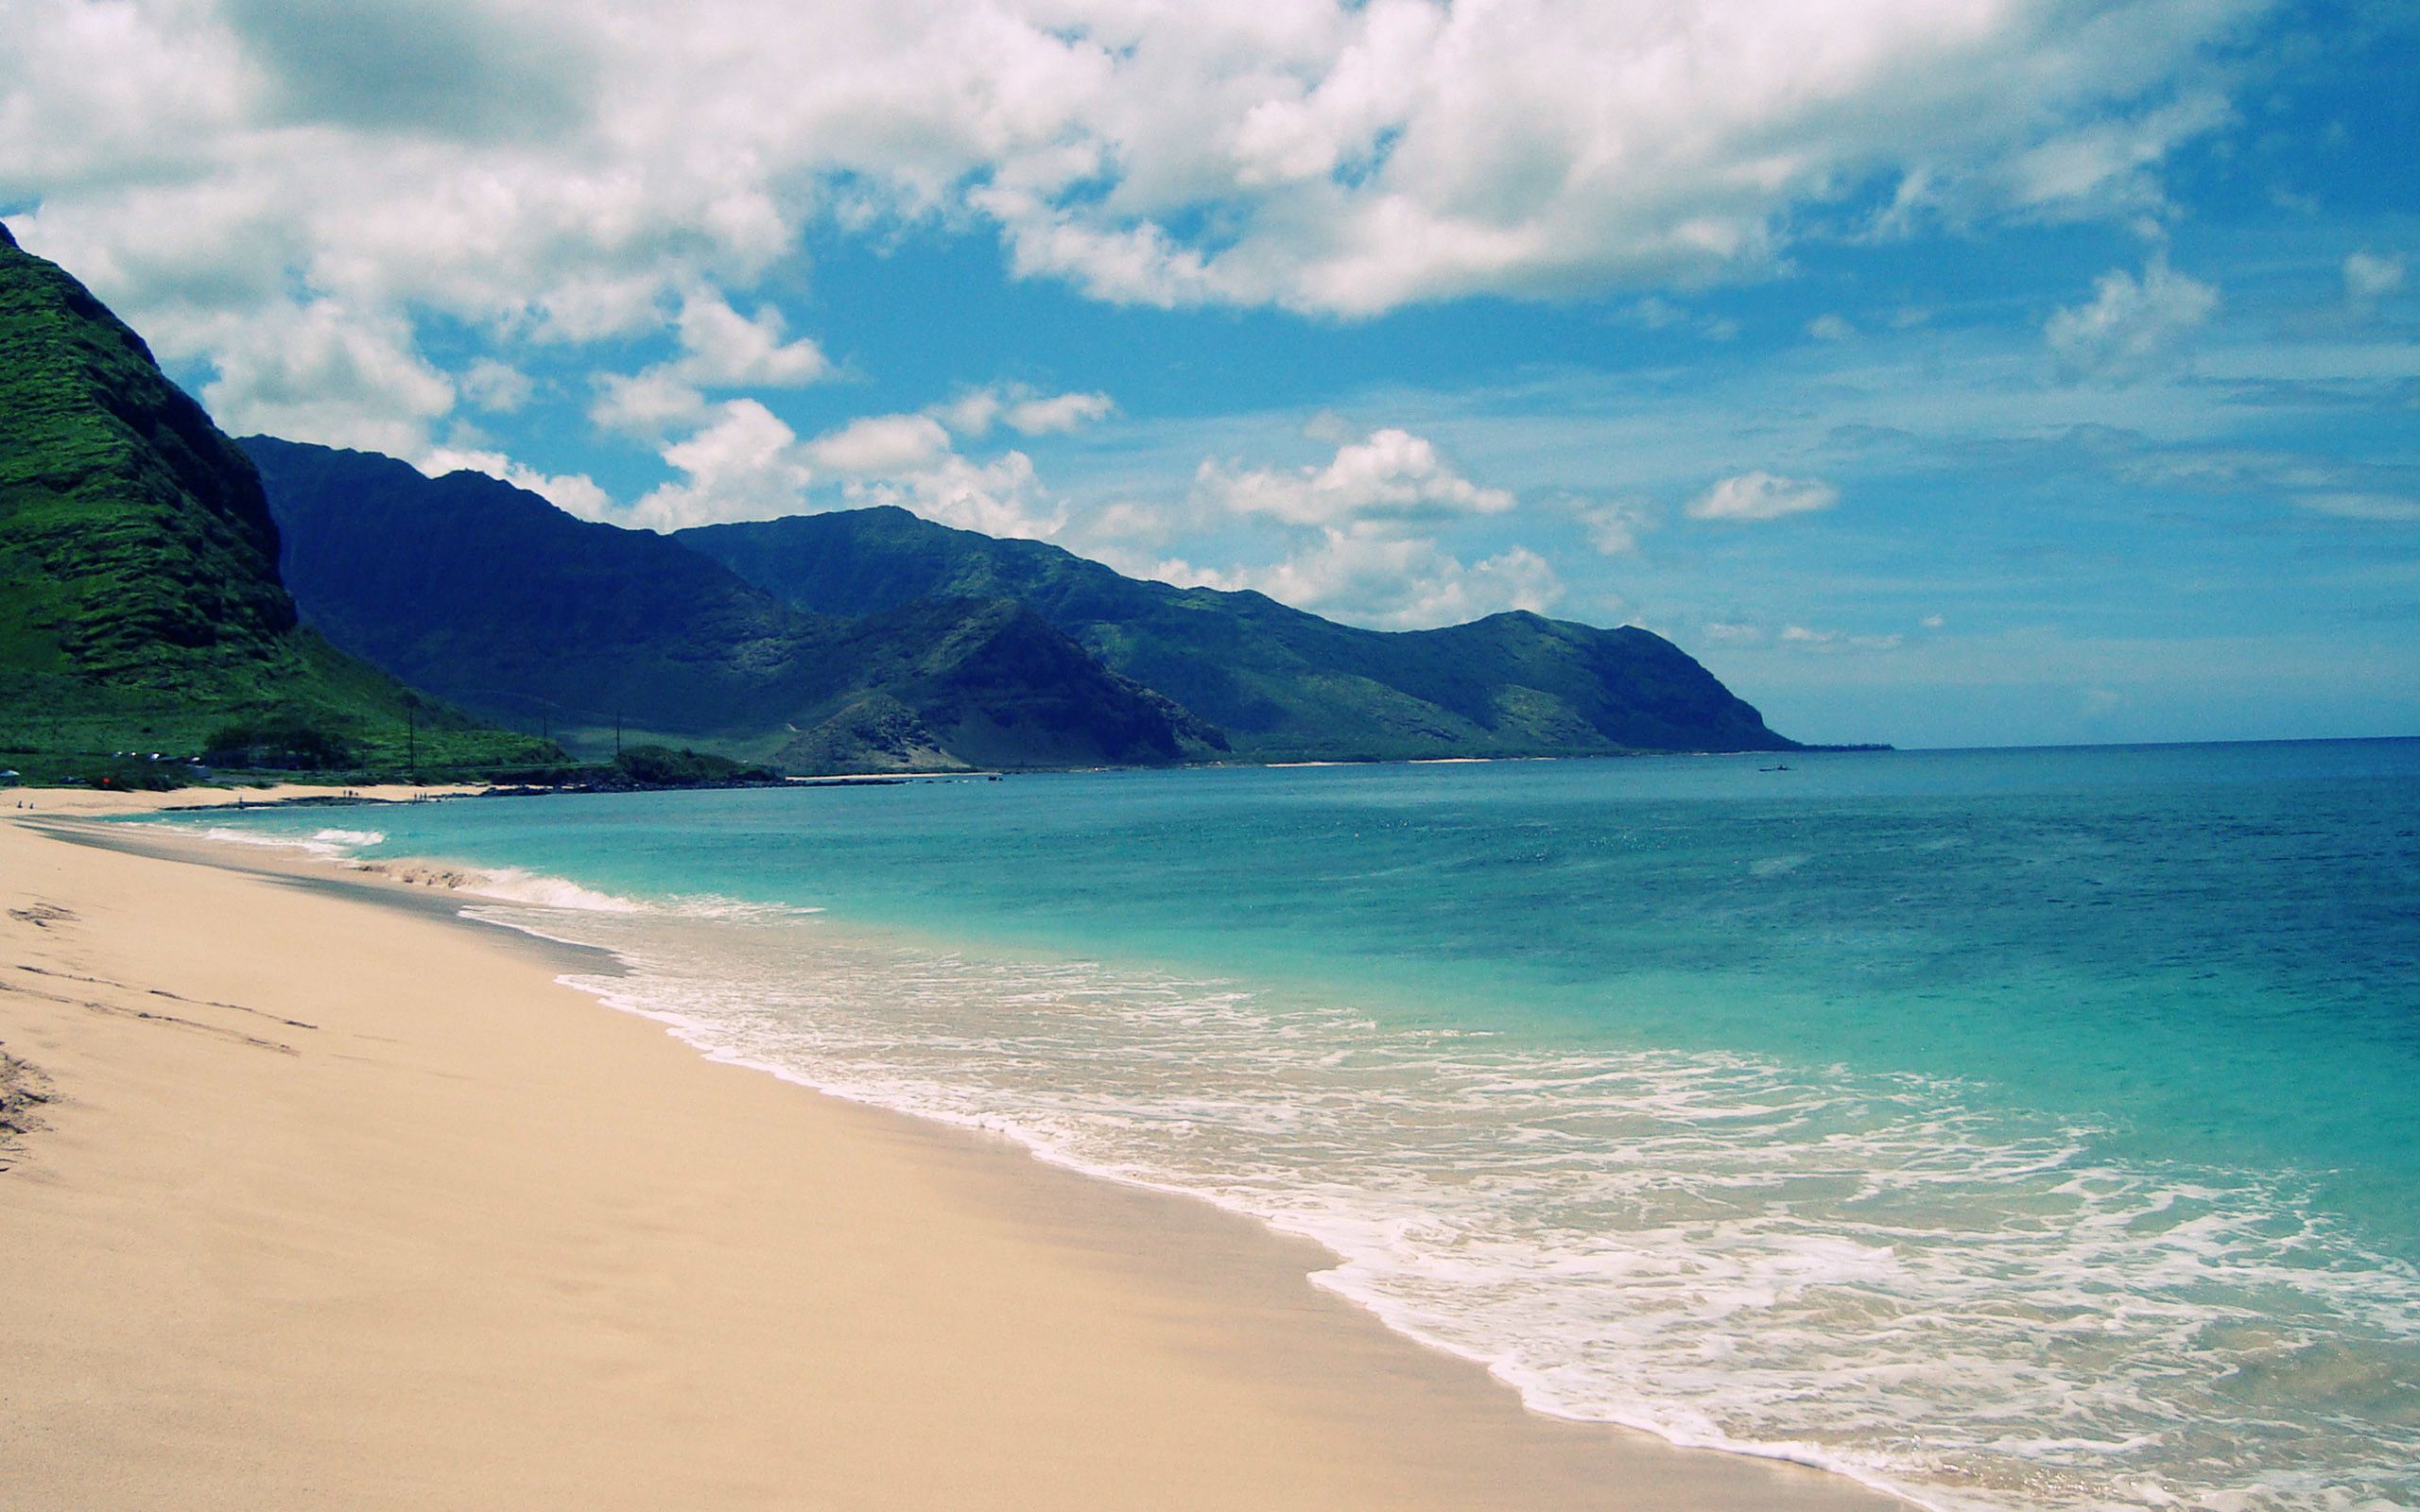 Hawaii Beach Wallpaper for PC. Full HD Picture